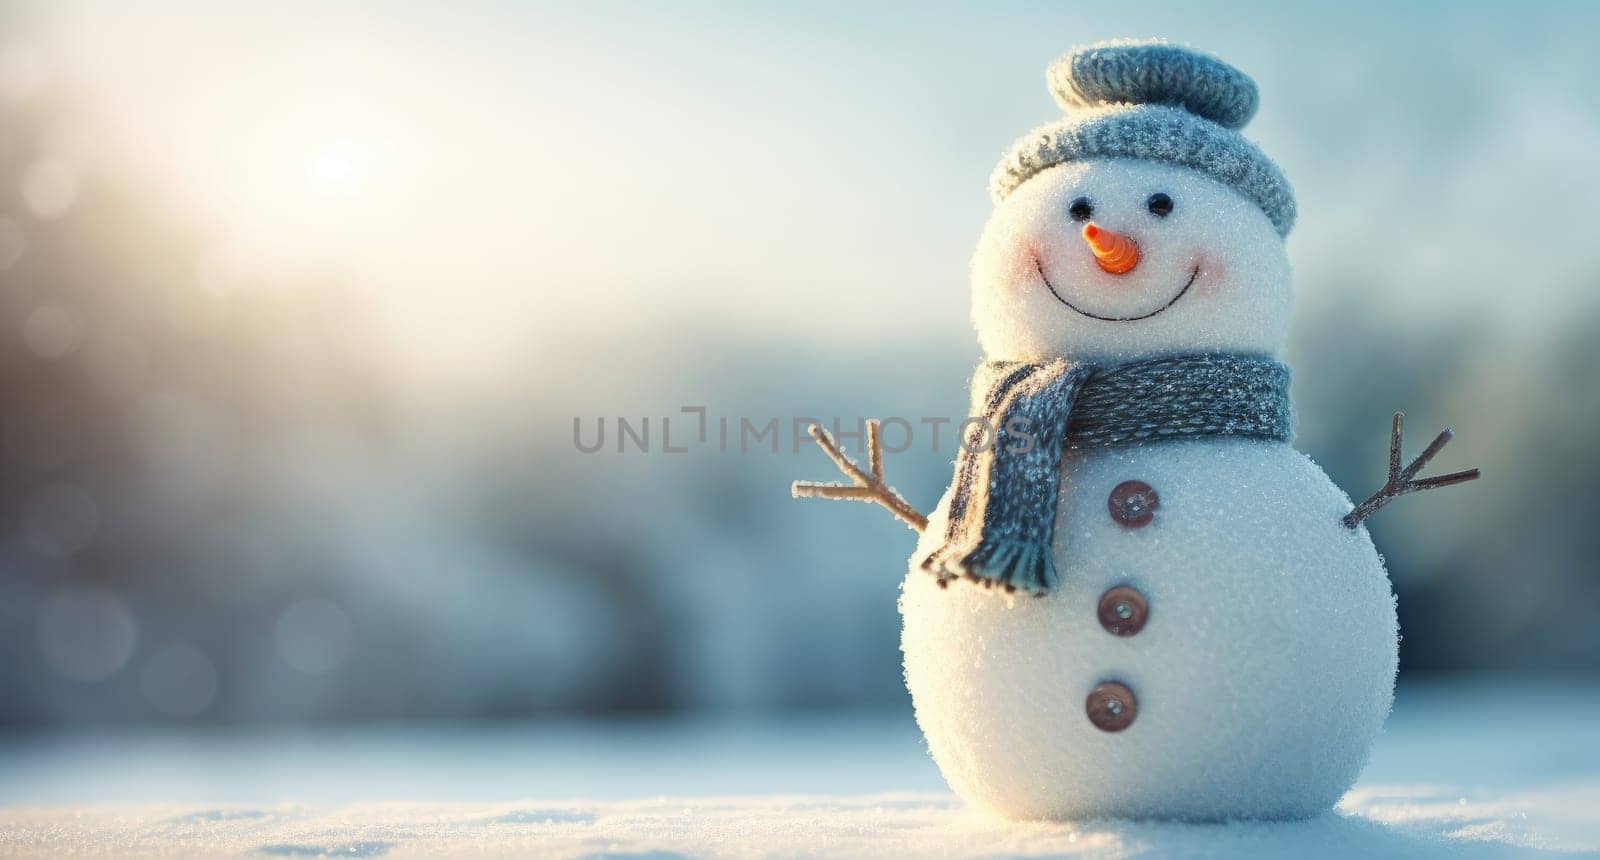 Small snowman on the background of a winter landscape